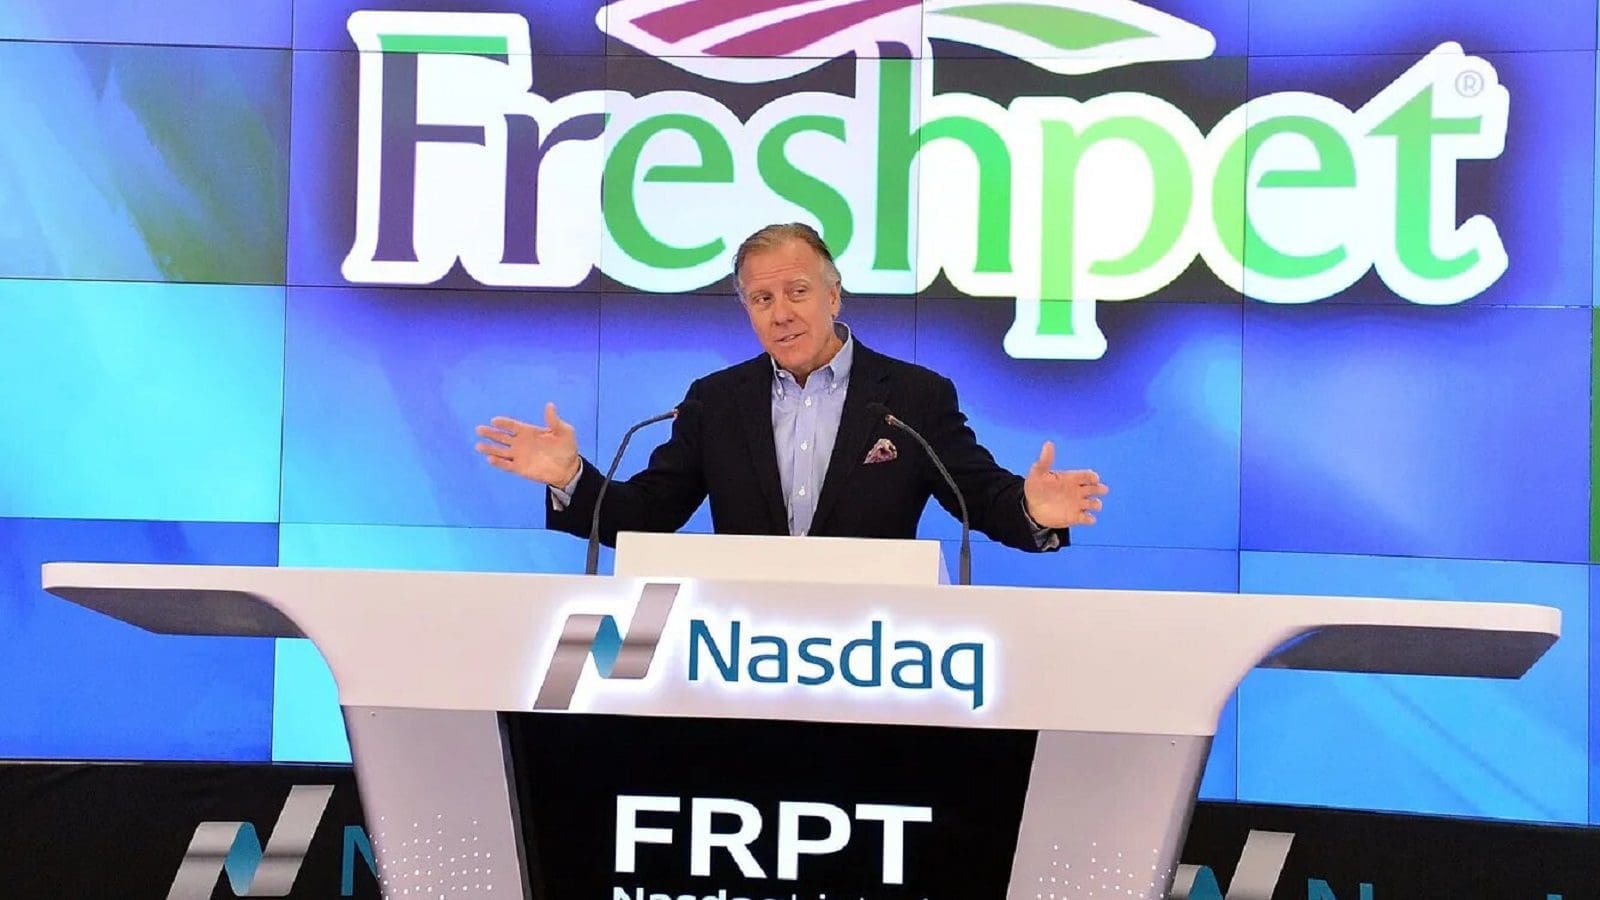 Freshpet installs Walter George as new board chair to support operational improvement 